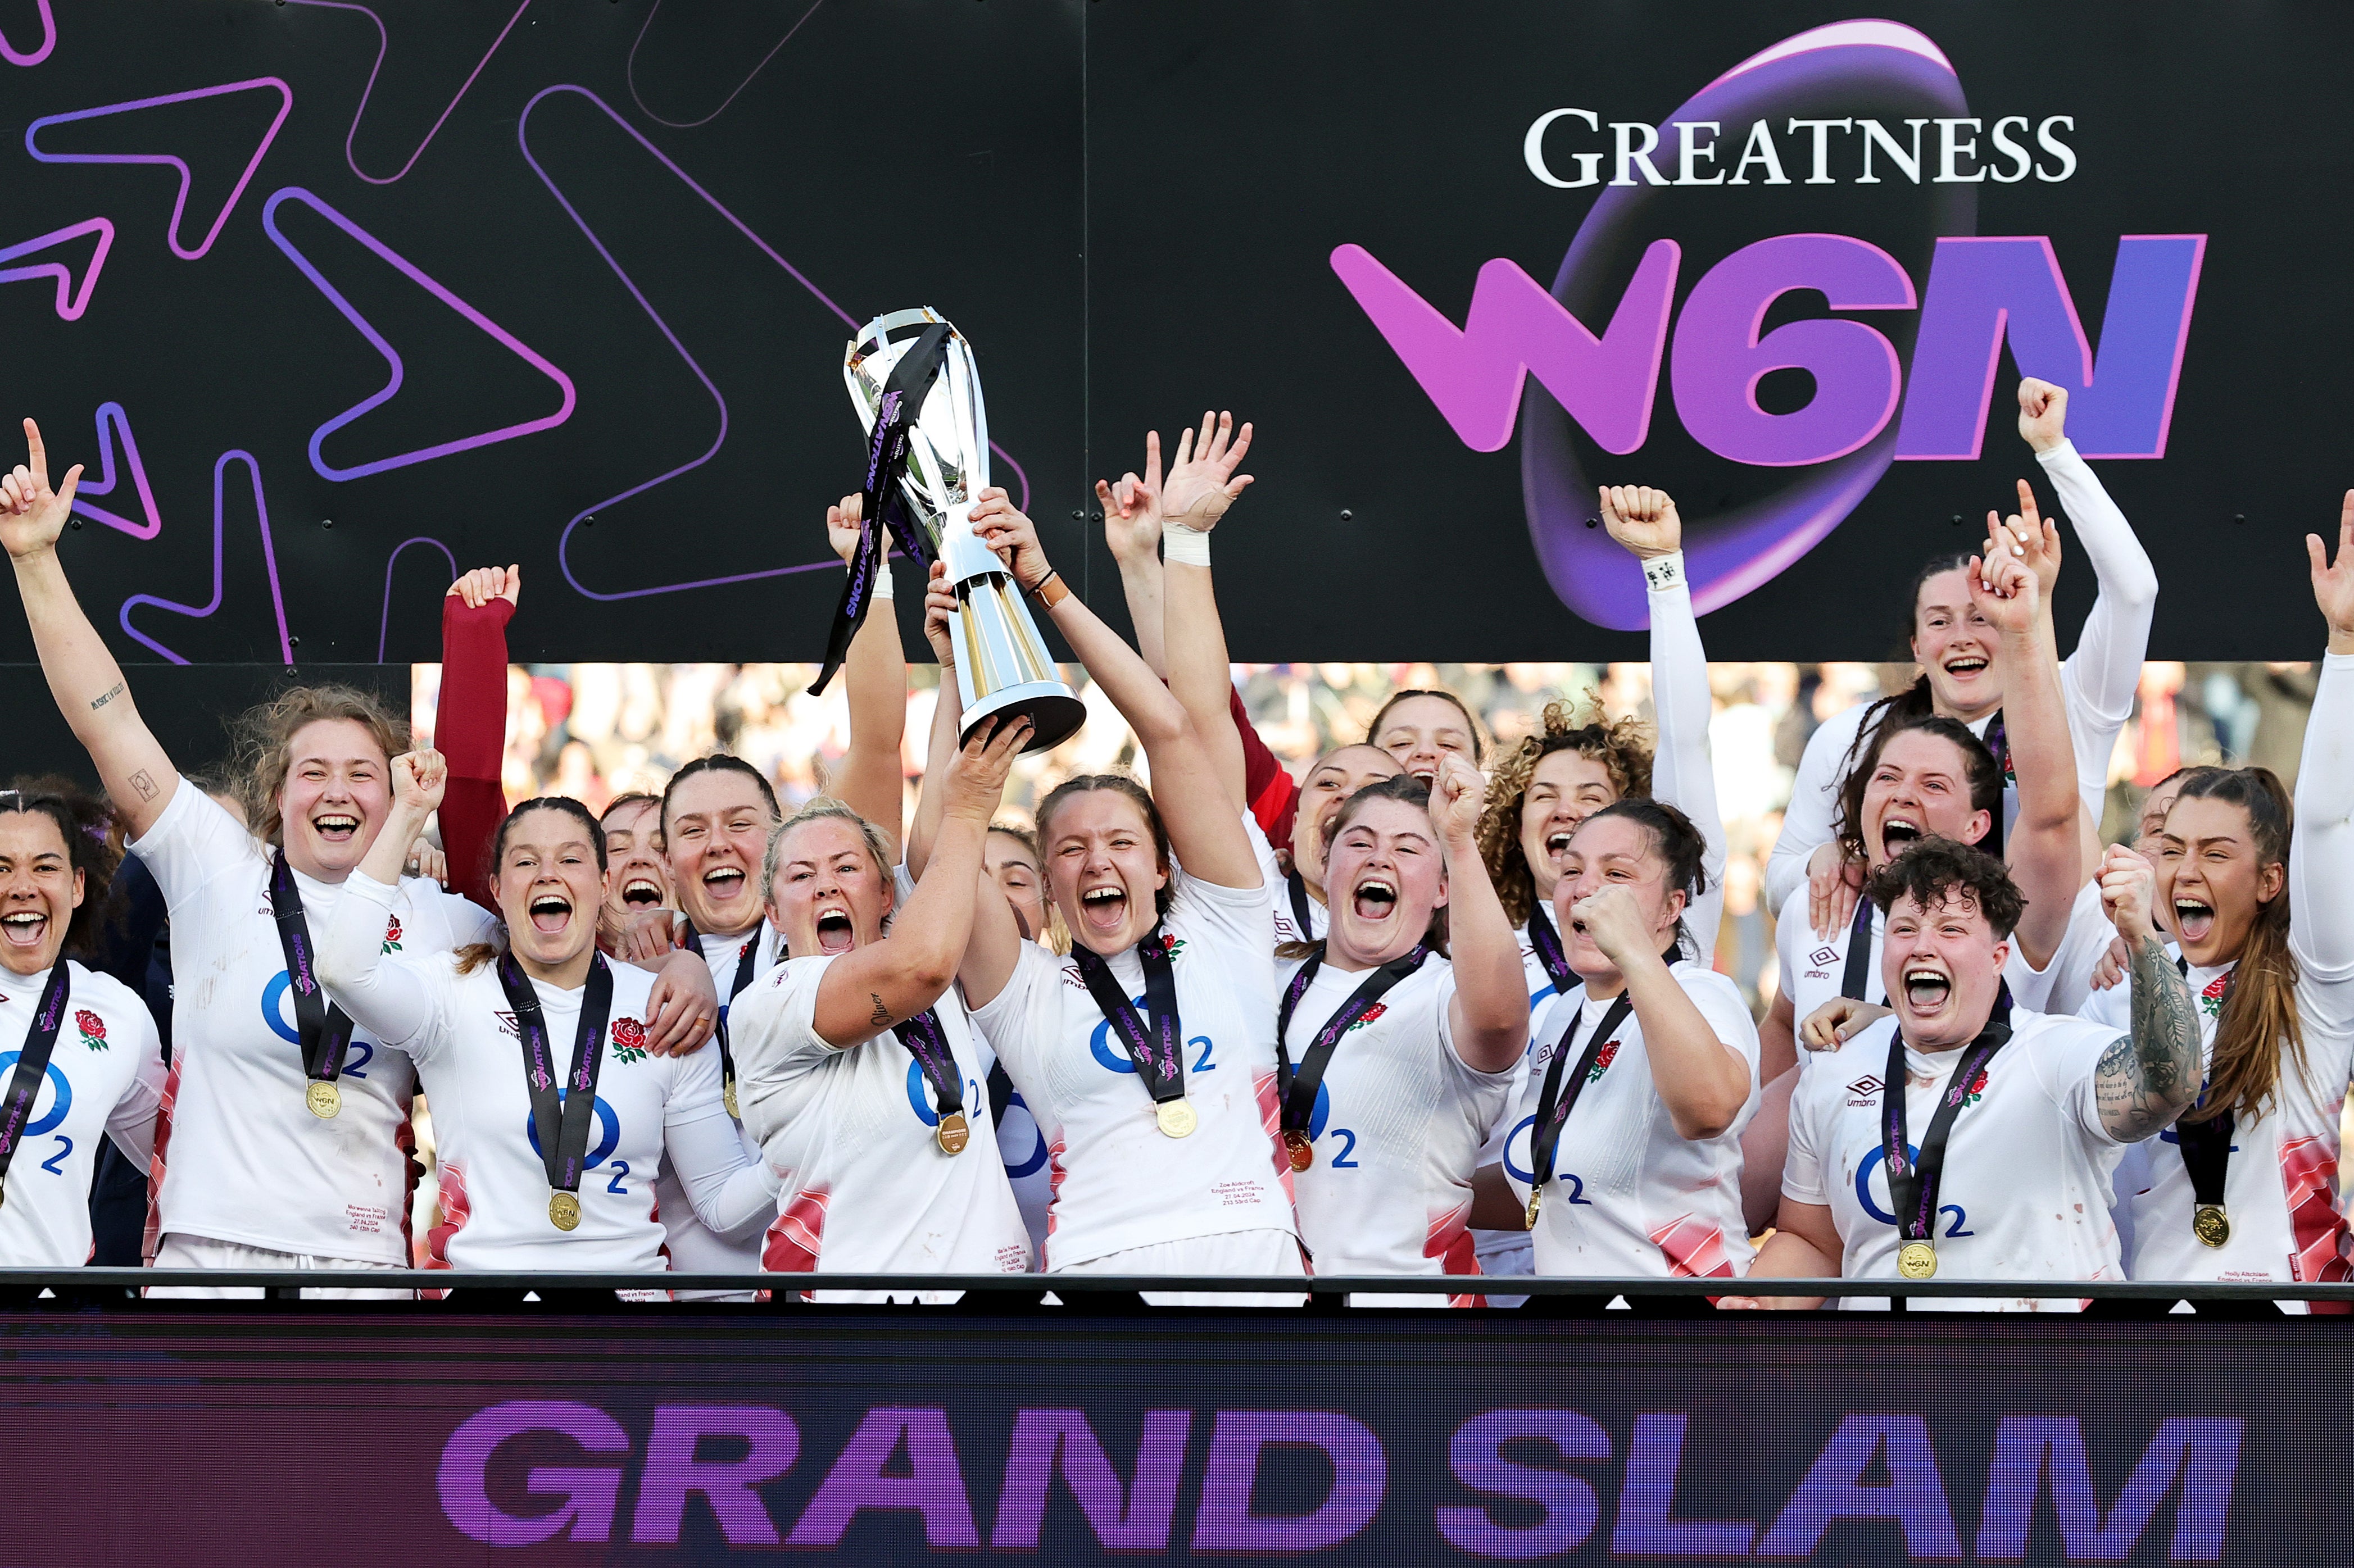 England secured another grand slam crown